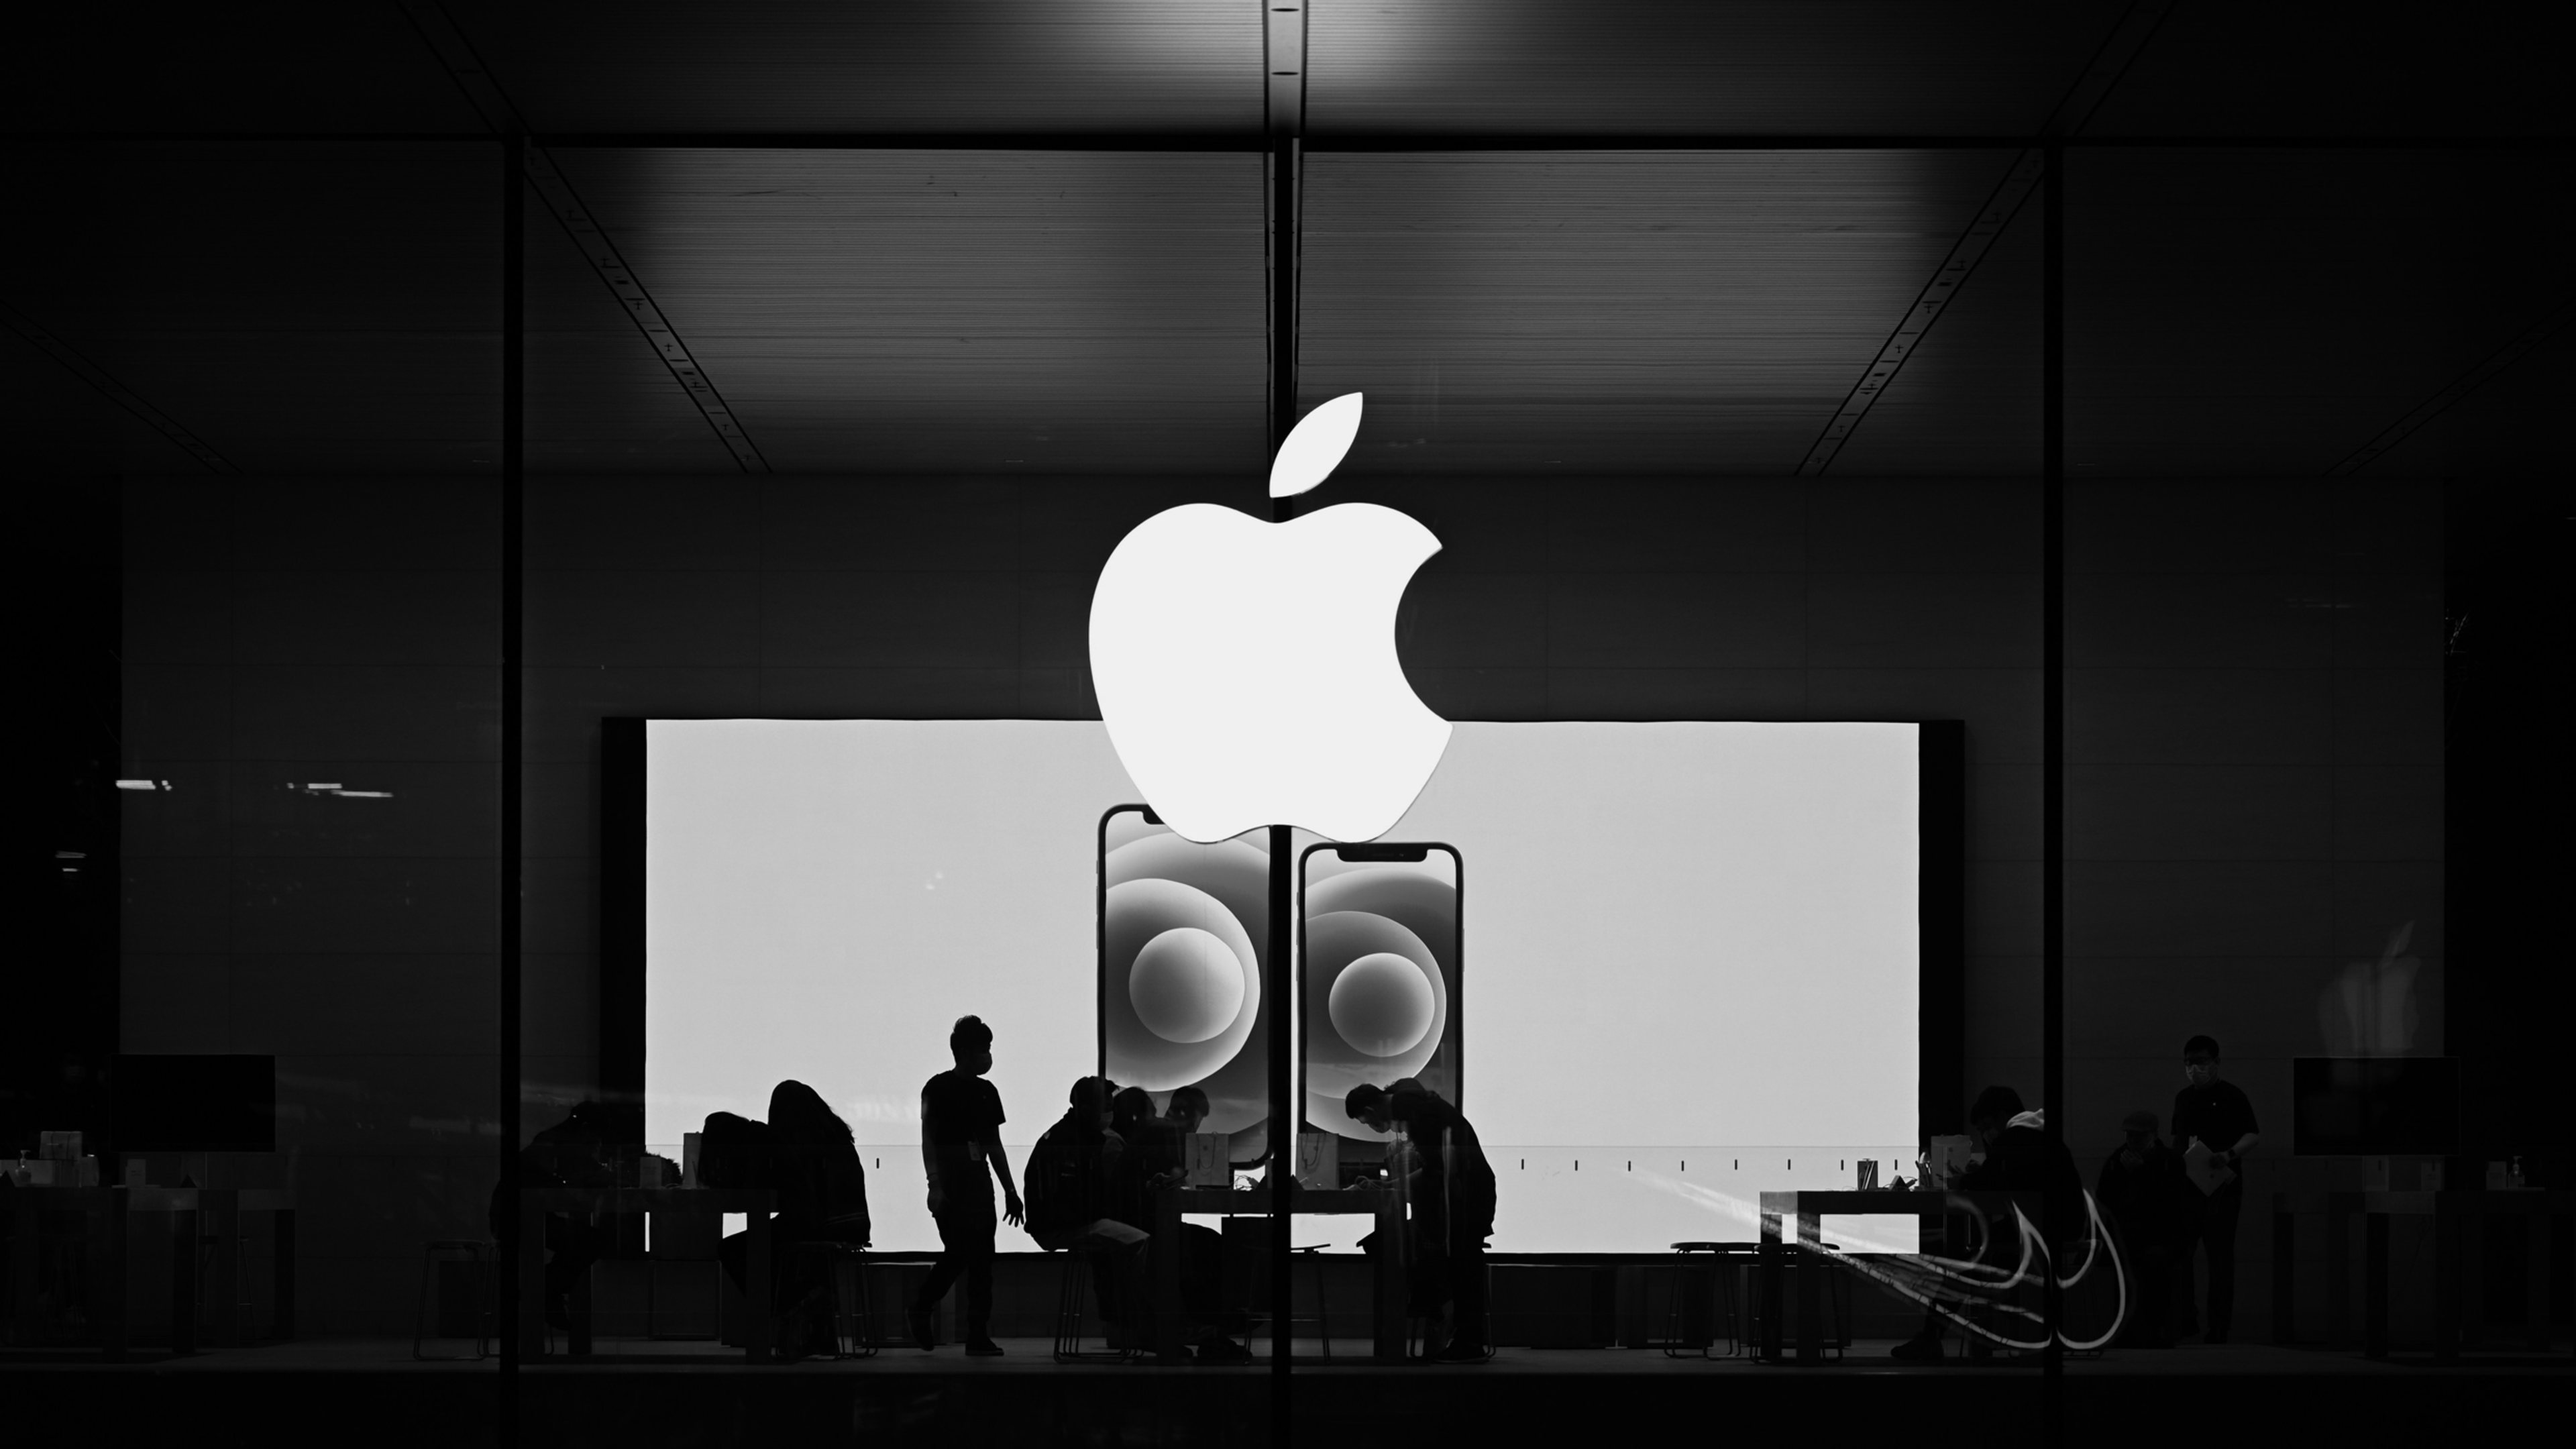 Apple logo with store behind in black and white.